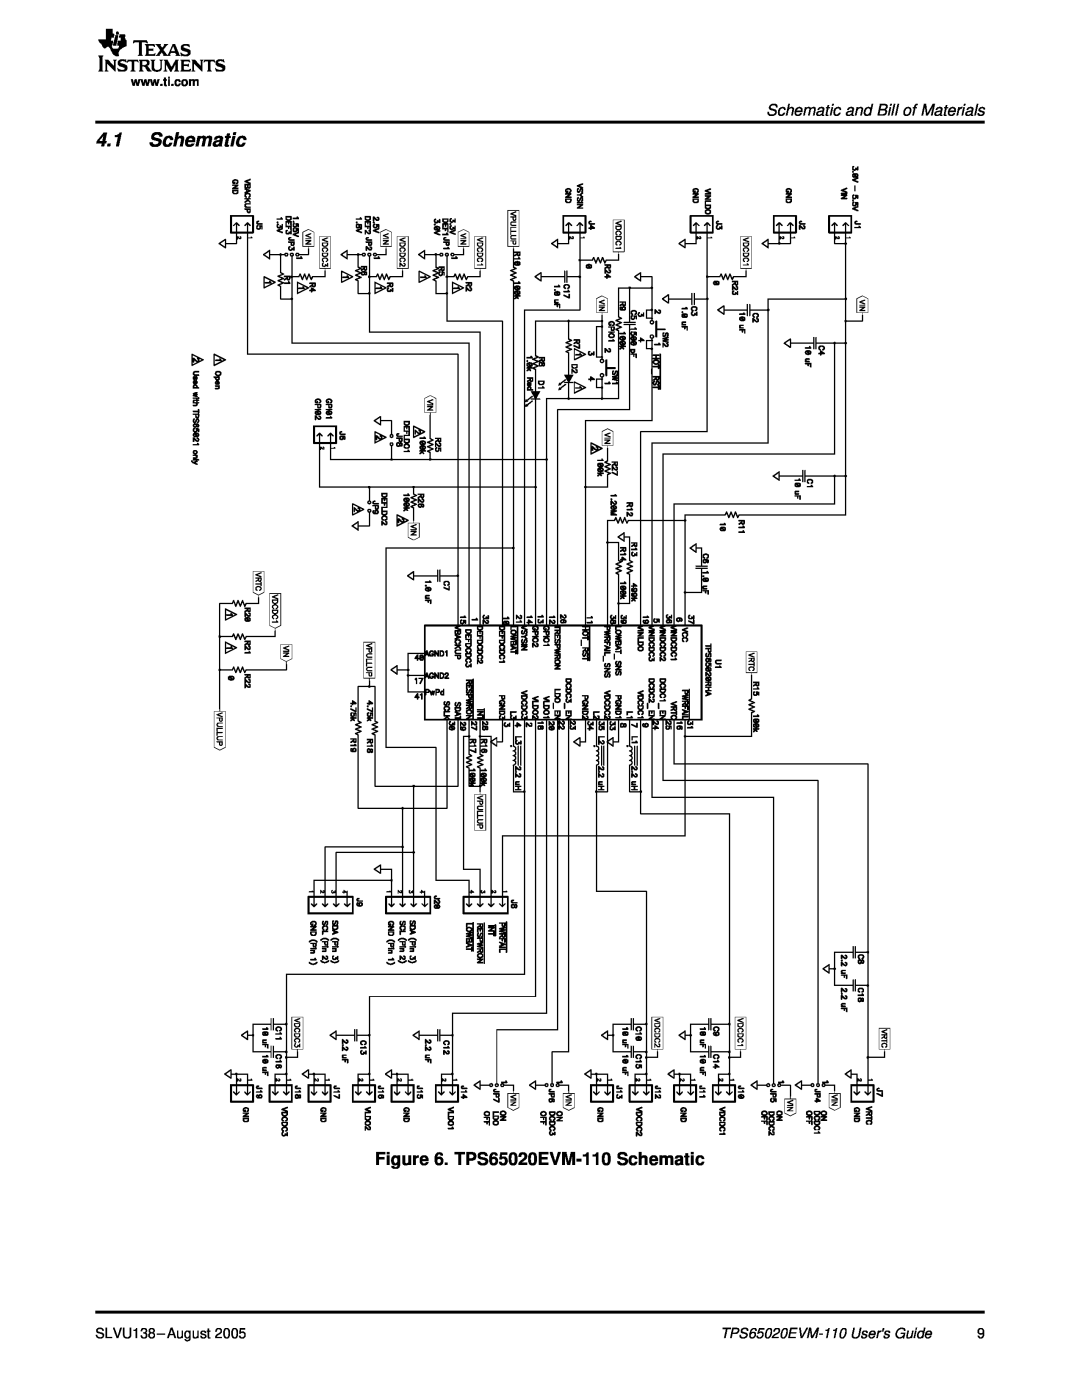 Texas Instruments manual TPS65020EVM-110 Schematic, Schematic and Bill of Materials 